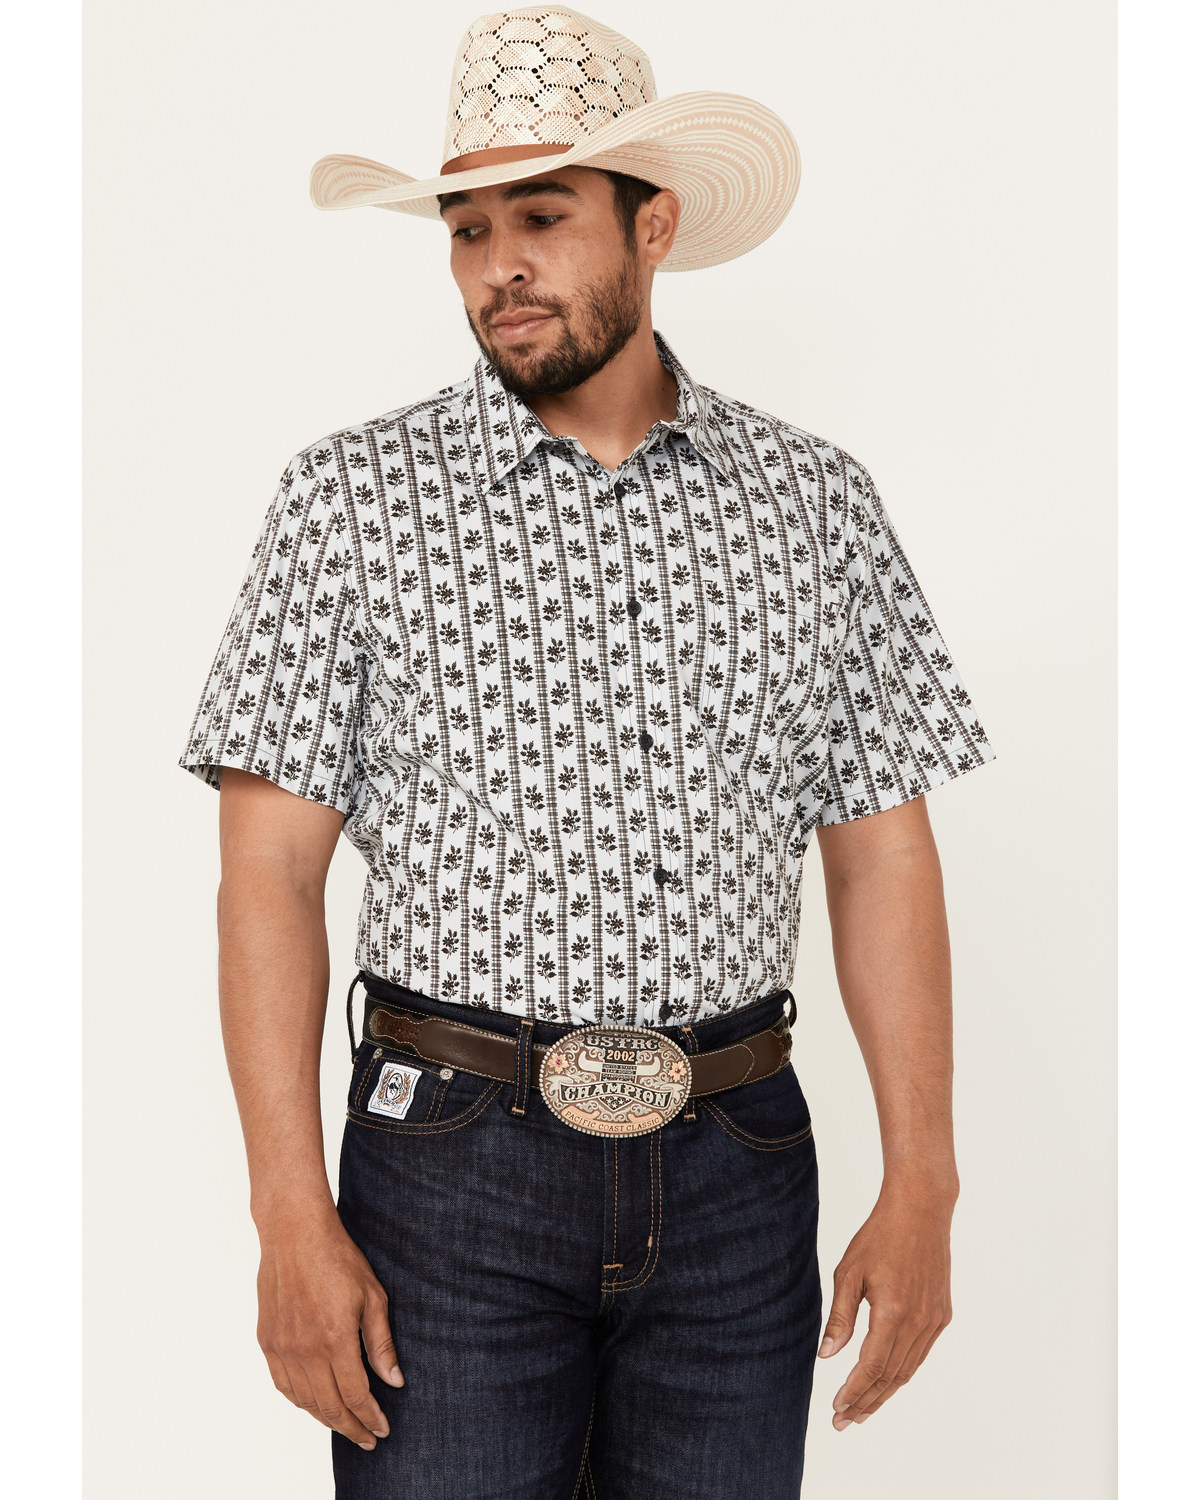 Gibson Trading Co Talking Stick Vertical Striped Print Short Sleeve Button-Down Western Shirt